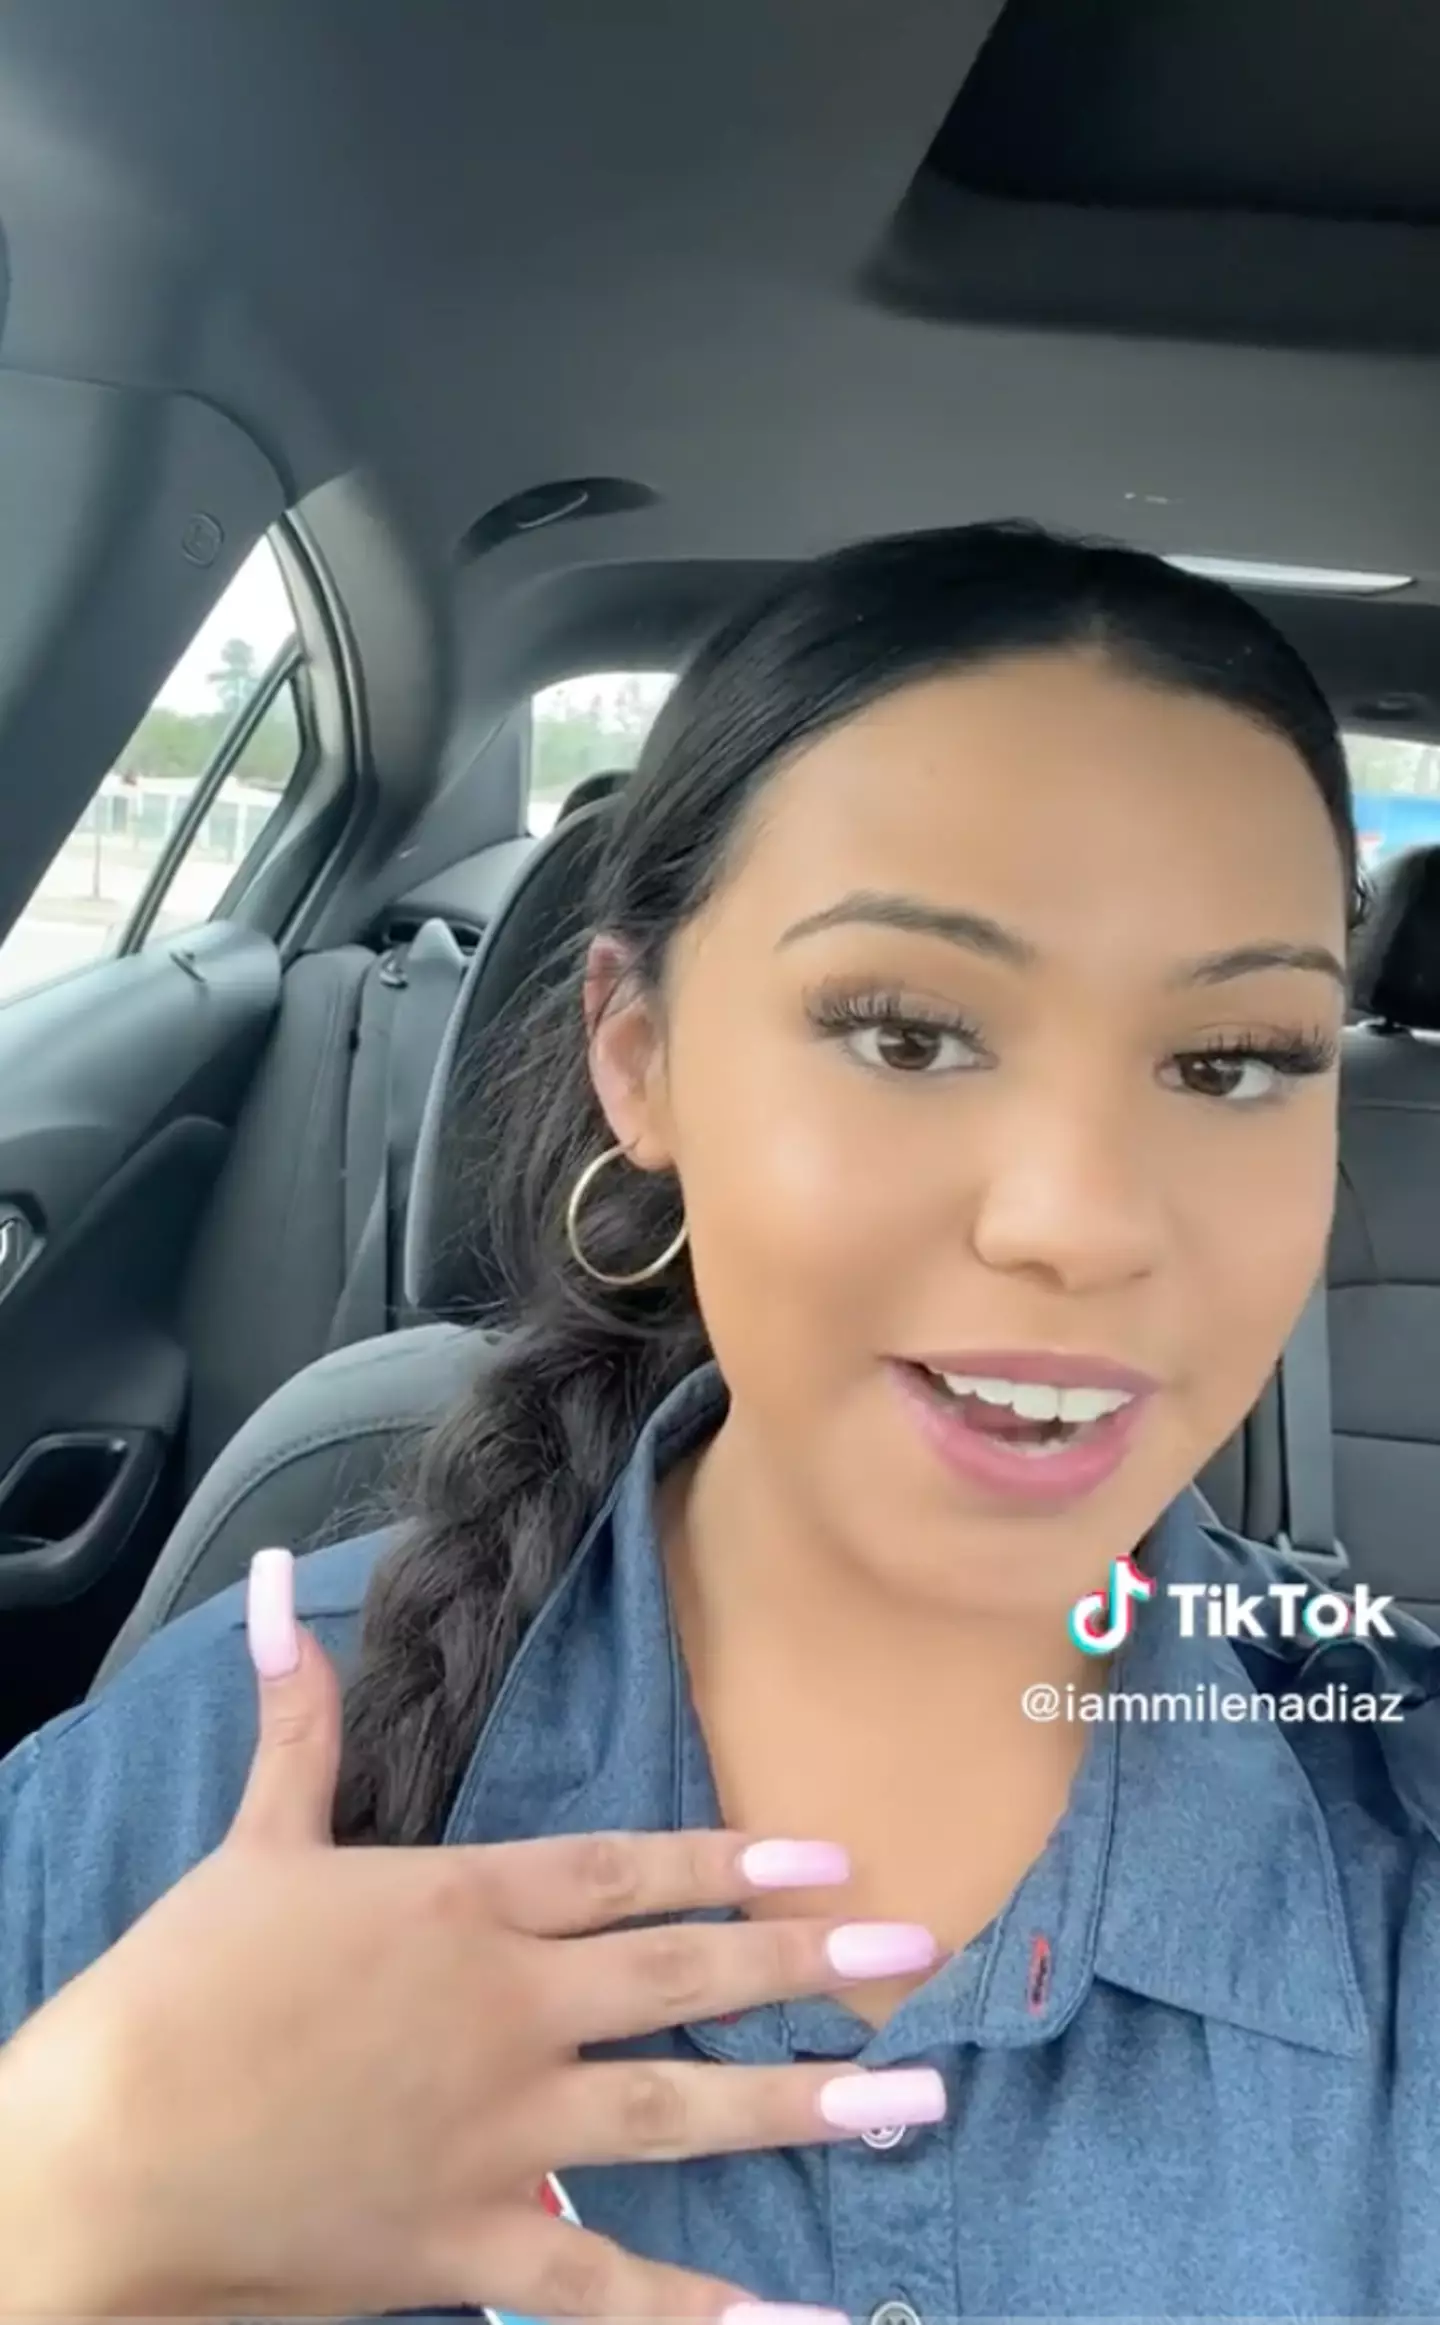 The driver shared her daily earnings to TikTok.